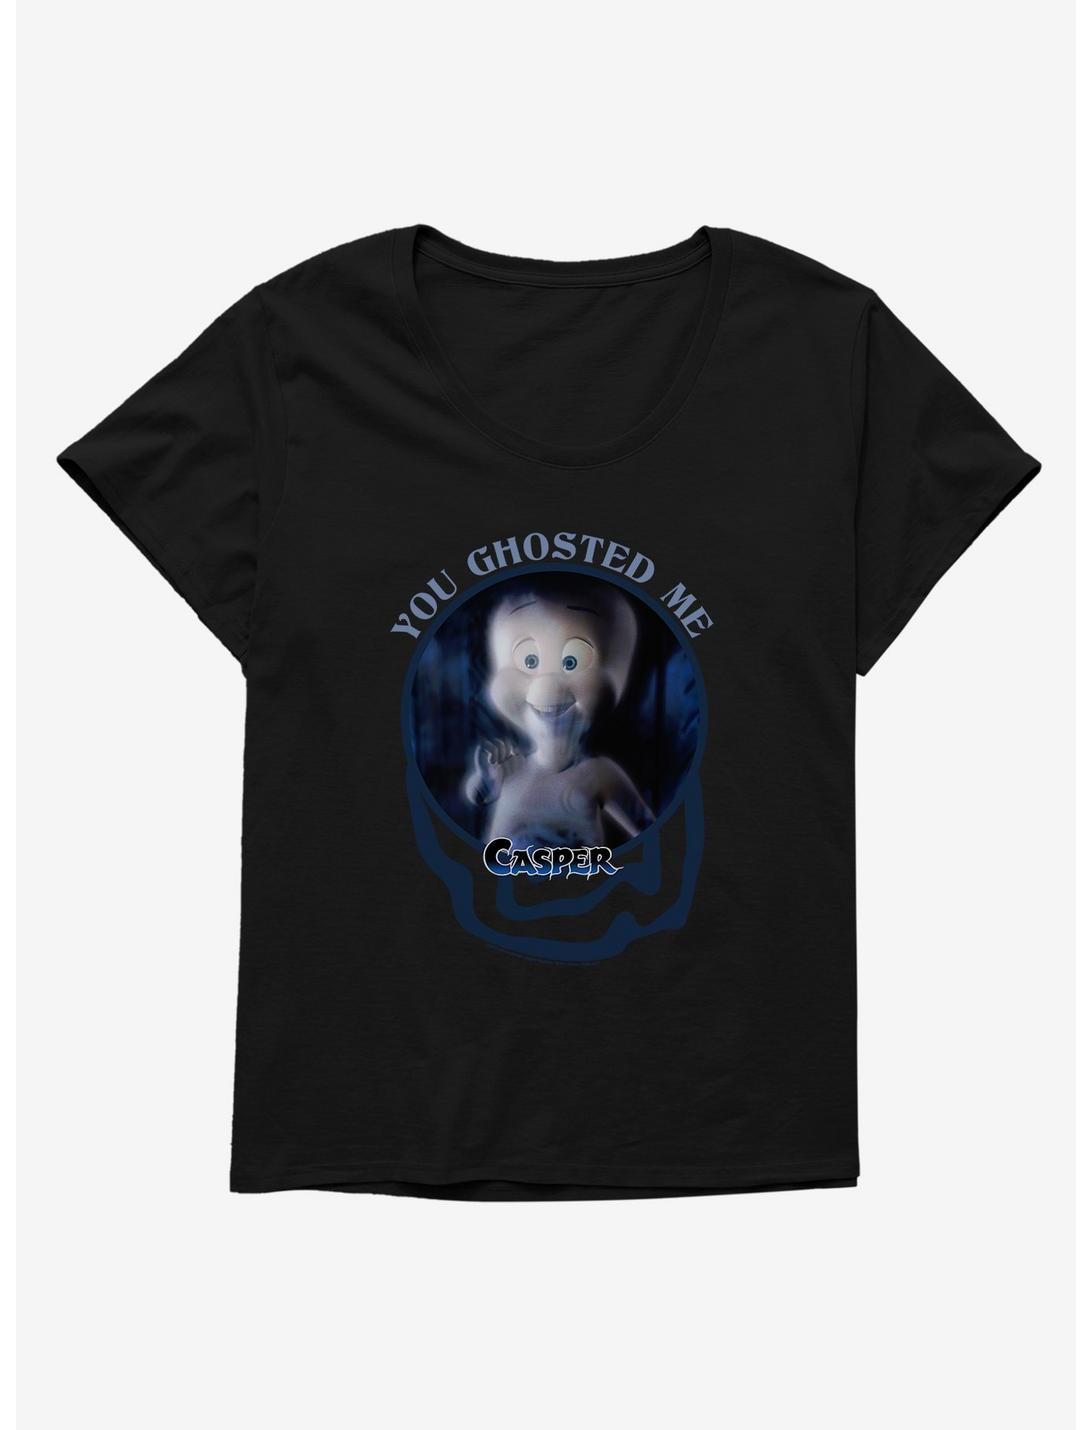 Casper You Ghosted Me Womens T-Shirt Plus Size, BLACK, hi-res